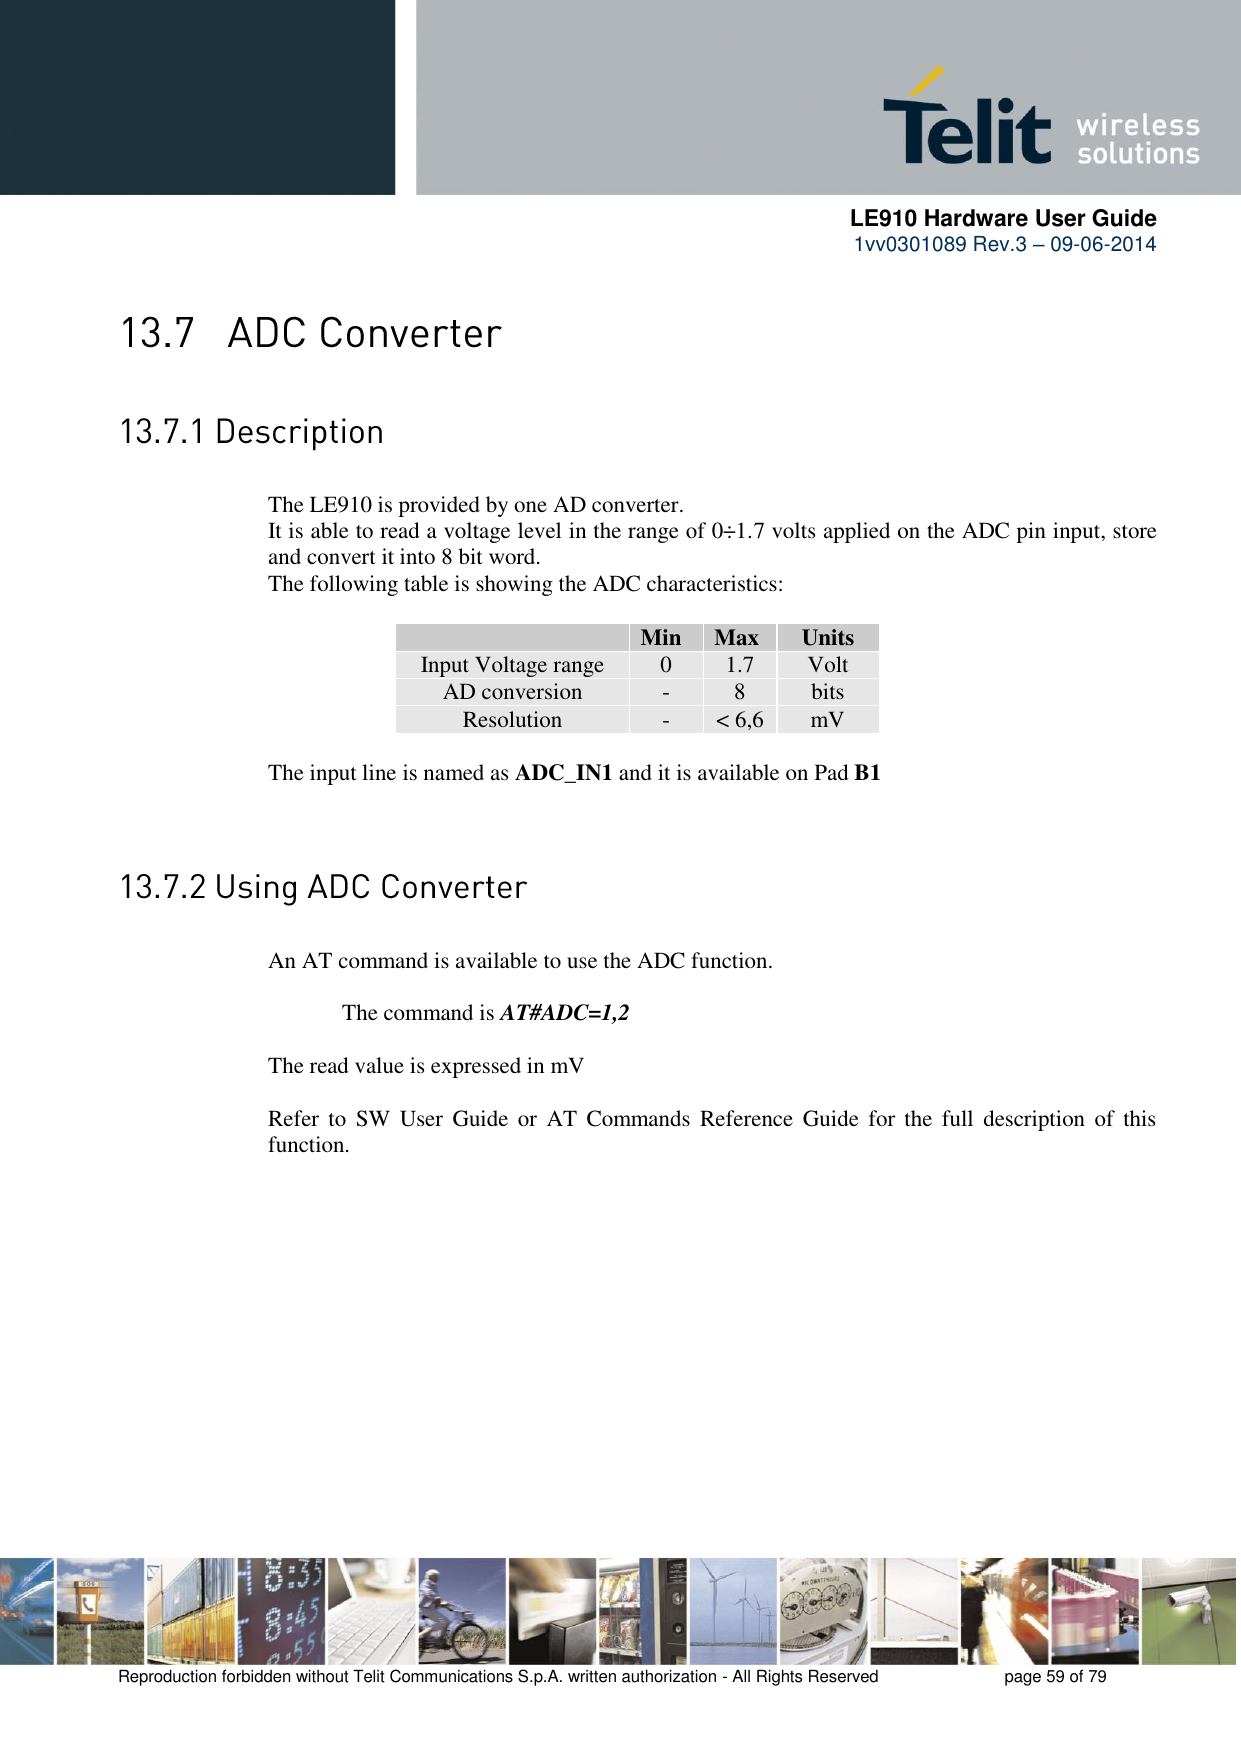      LE910 Hardware User Guide 1vv0301089 Rev.3 – 09-06-2014    Reproduction forbidden without Telit Communications S.p.A. written authorization - All Rights Reserved    page 59 of 79    The LE910 is provided by one AD converter.  It is able to read a voltage level in the range of 0÷1.7 volts applied on the ADC pin input, store and convert it into 8 bit word.  The following table is showing the ADC characteristics:   Min Max Units Input Voltage range 0 1.7 Volt AD conversion - 8 bits Resolution - &lt; 6,6 mV  The input line is named as ADC_IN1 and it is available on Pad B1     An AT command is available to use the ADC function.  The command is AT#ADC=1,2  The read value is expressed in mV  Refer  to  SW  User  Guide  or  AT  Commands Reference  Guide  for the  full  description  of  this function. 